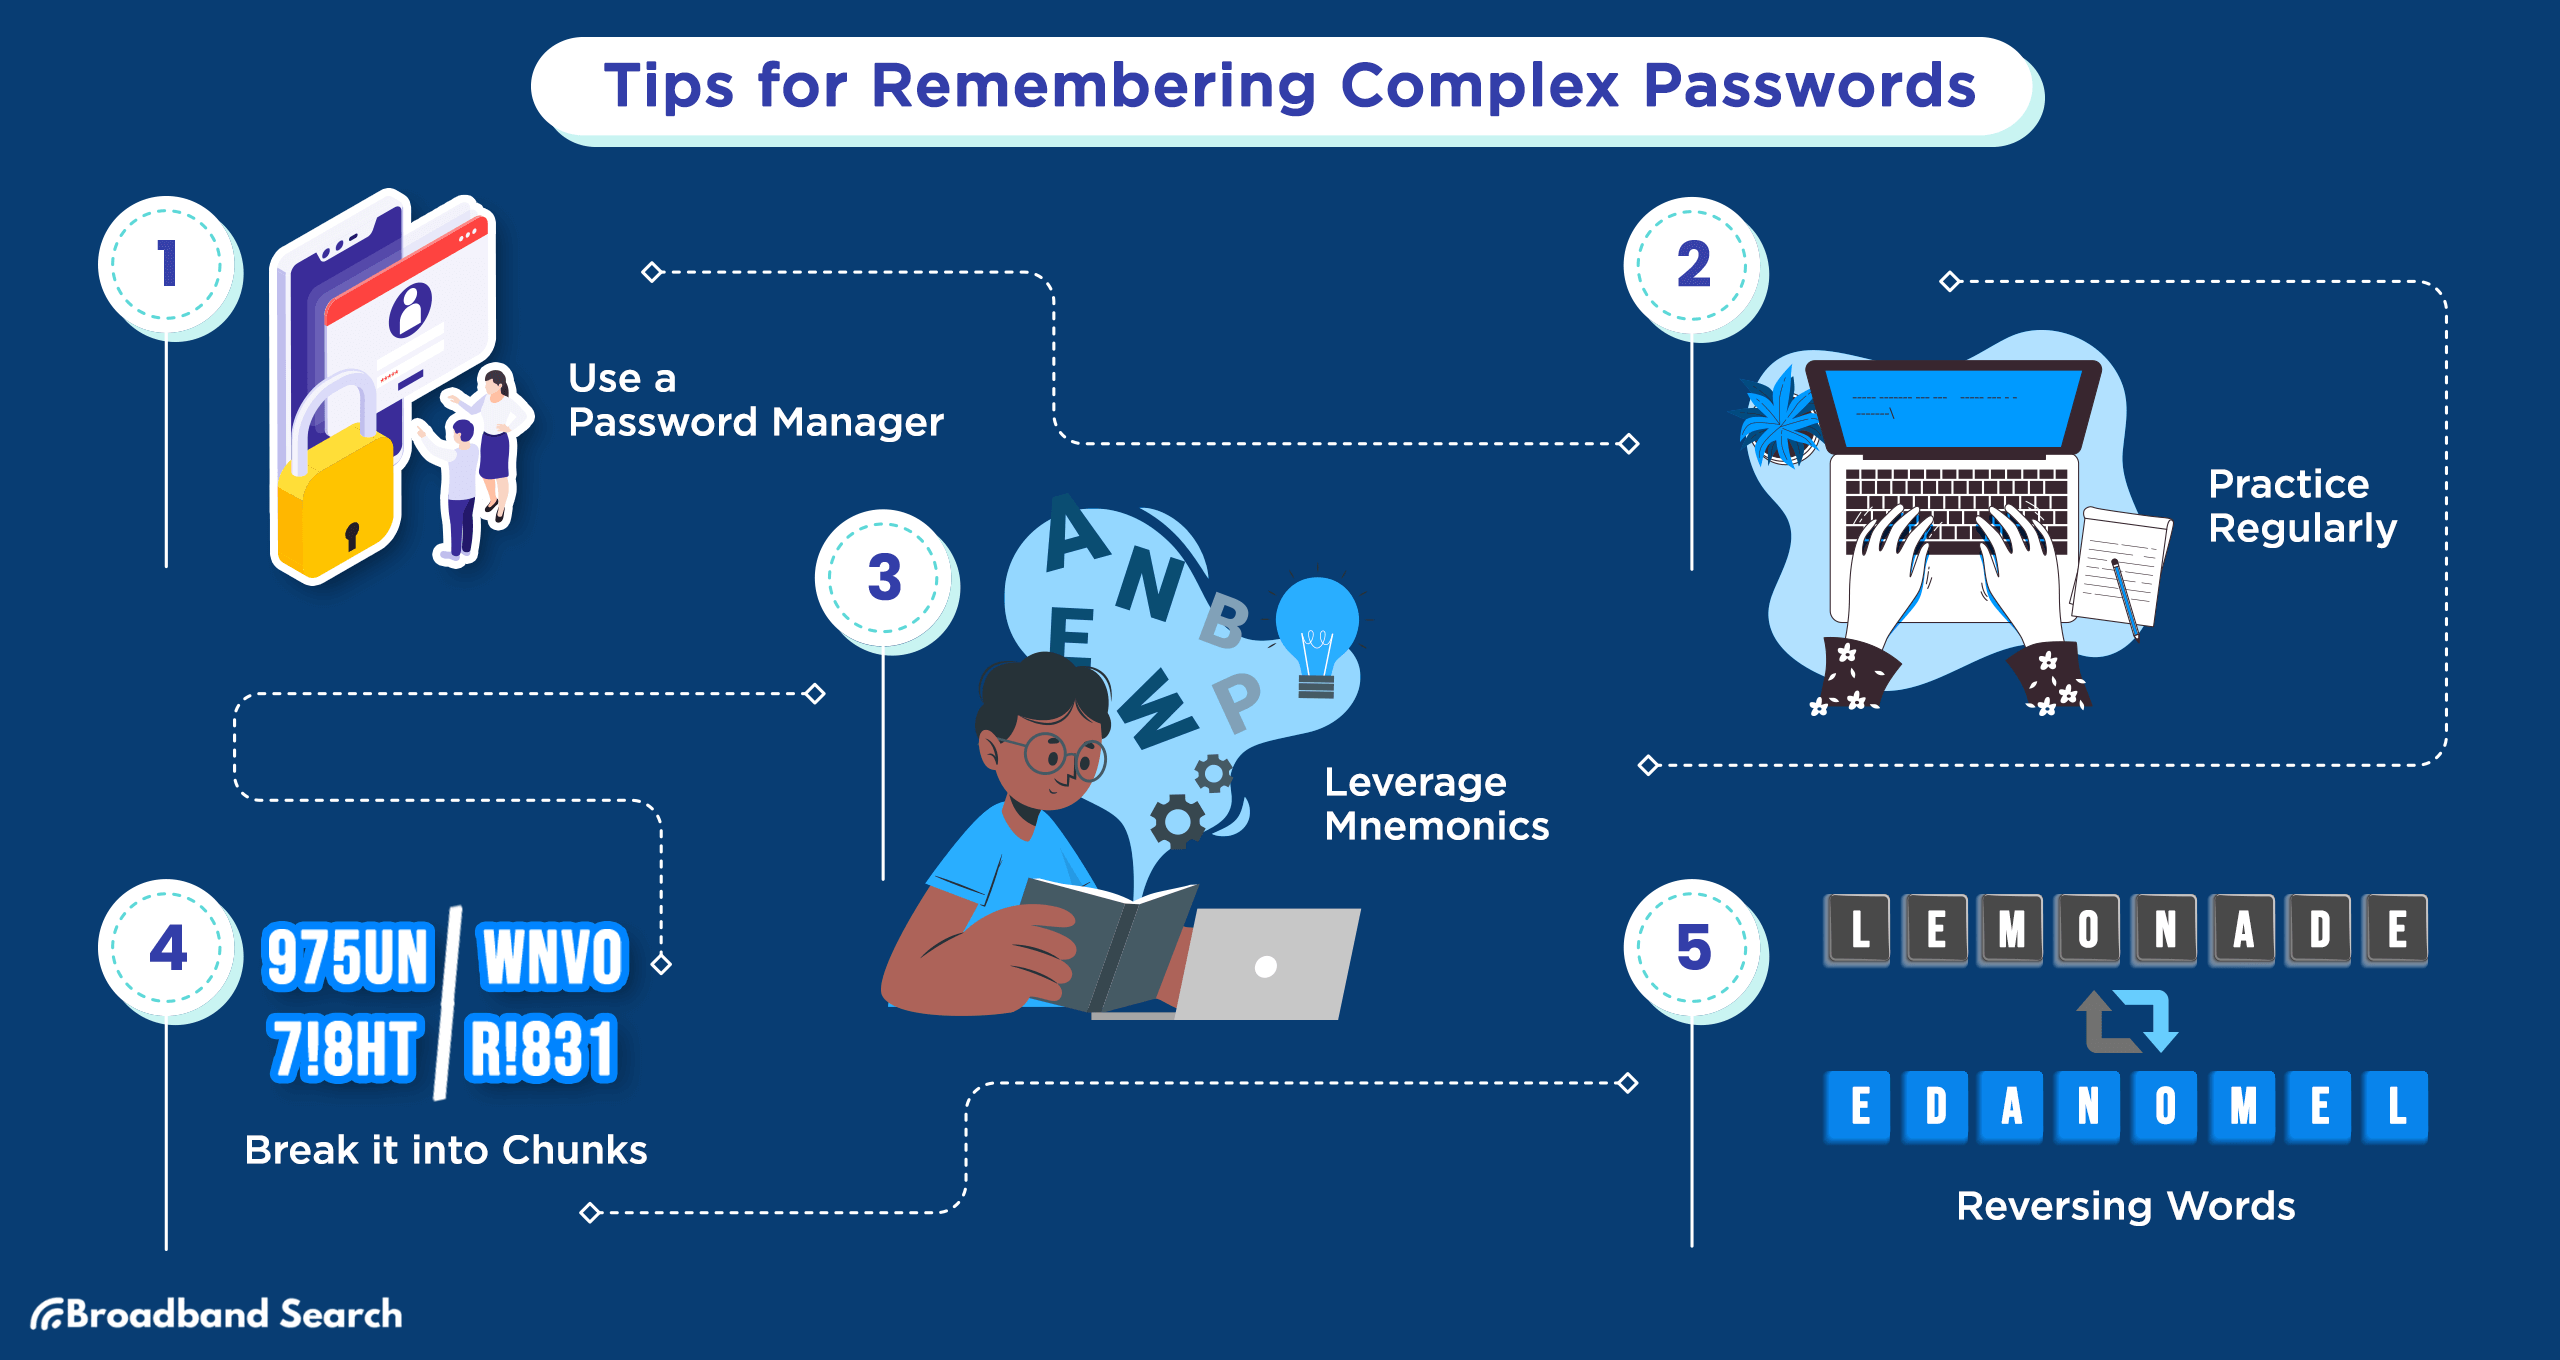 Tips for Remembering Complex Passwords